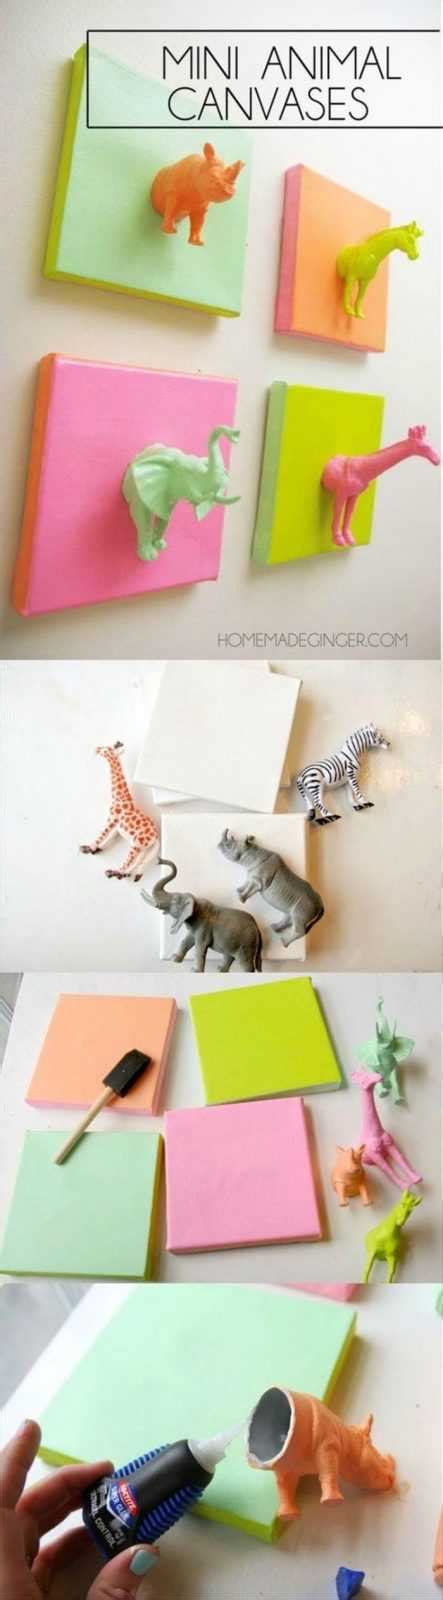 10 Simple Yet Great Diy Project Ideas